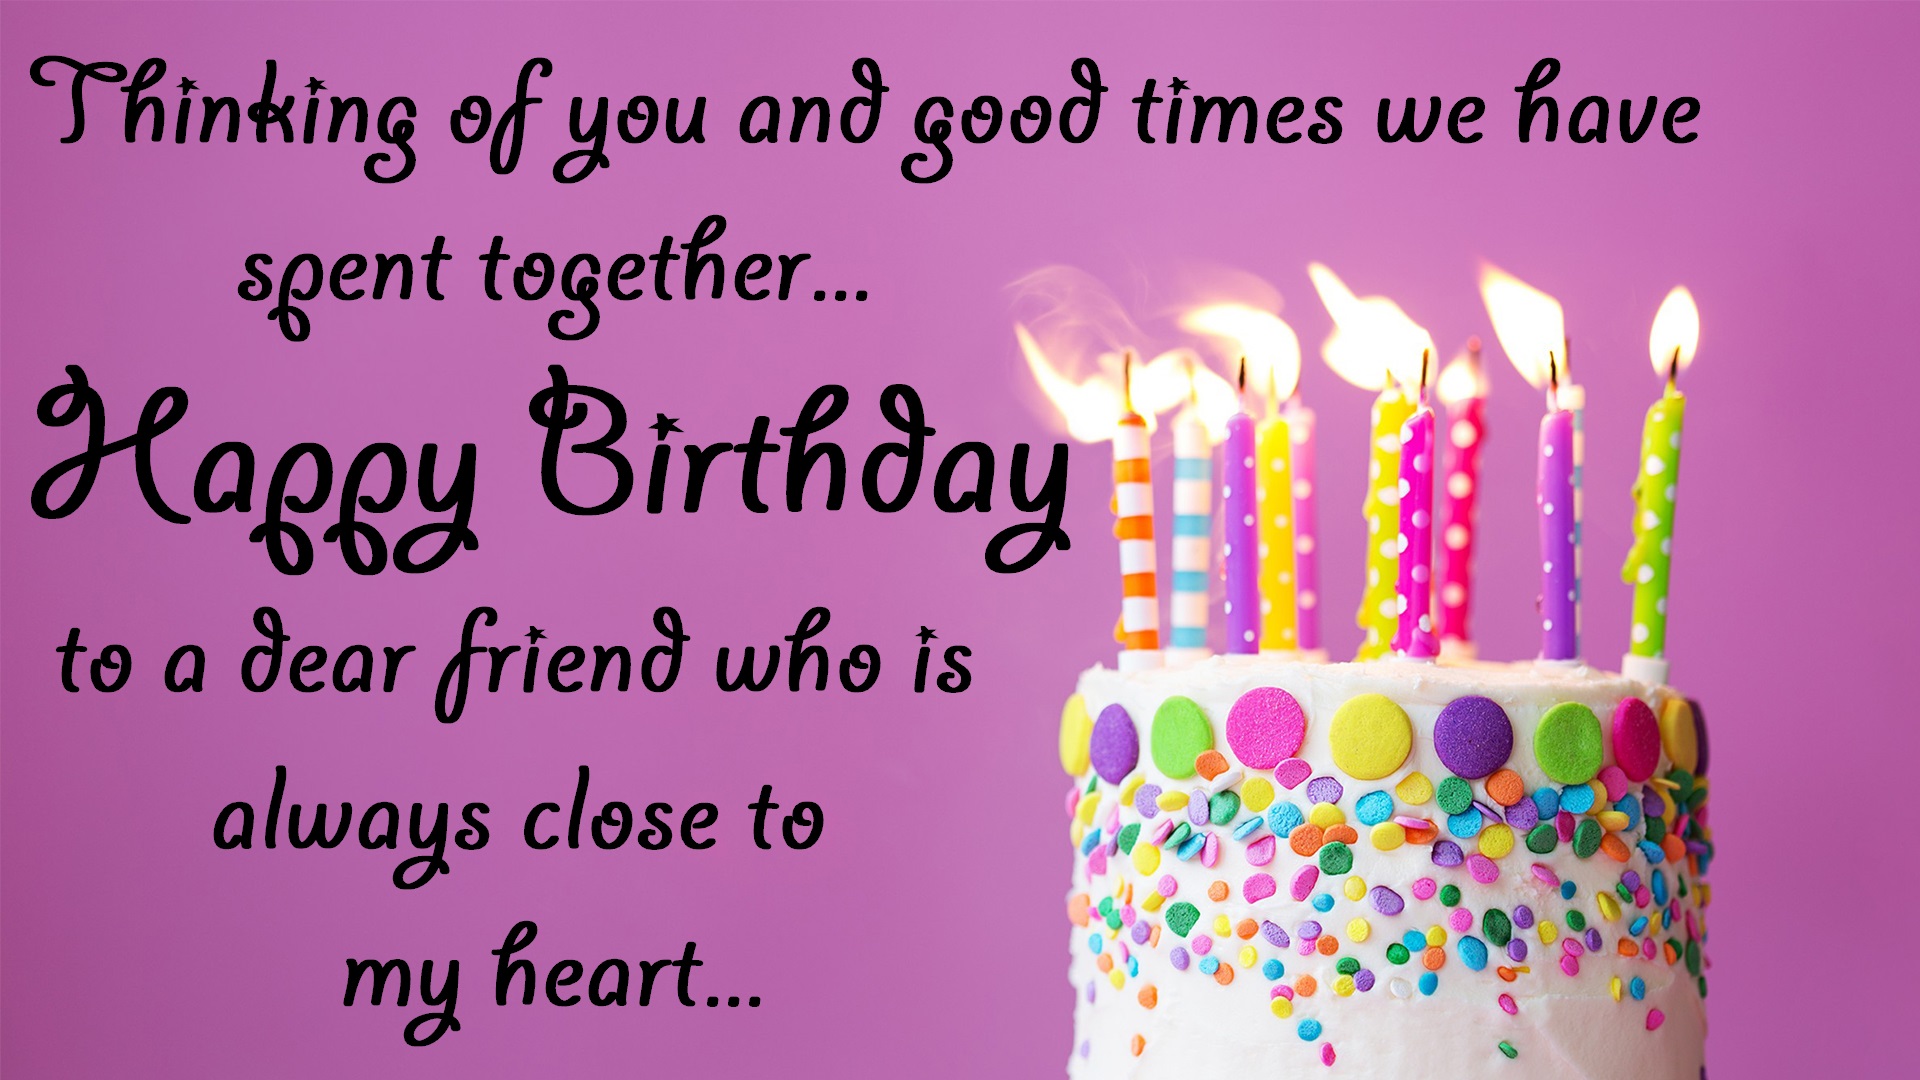 Happy Birthday Wishes For a Friend HD Images & Pictures free download